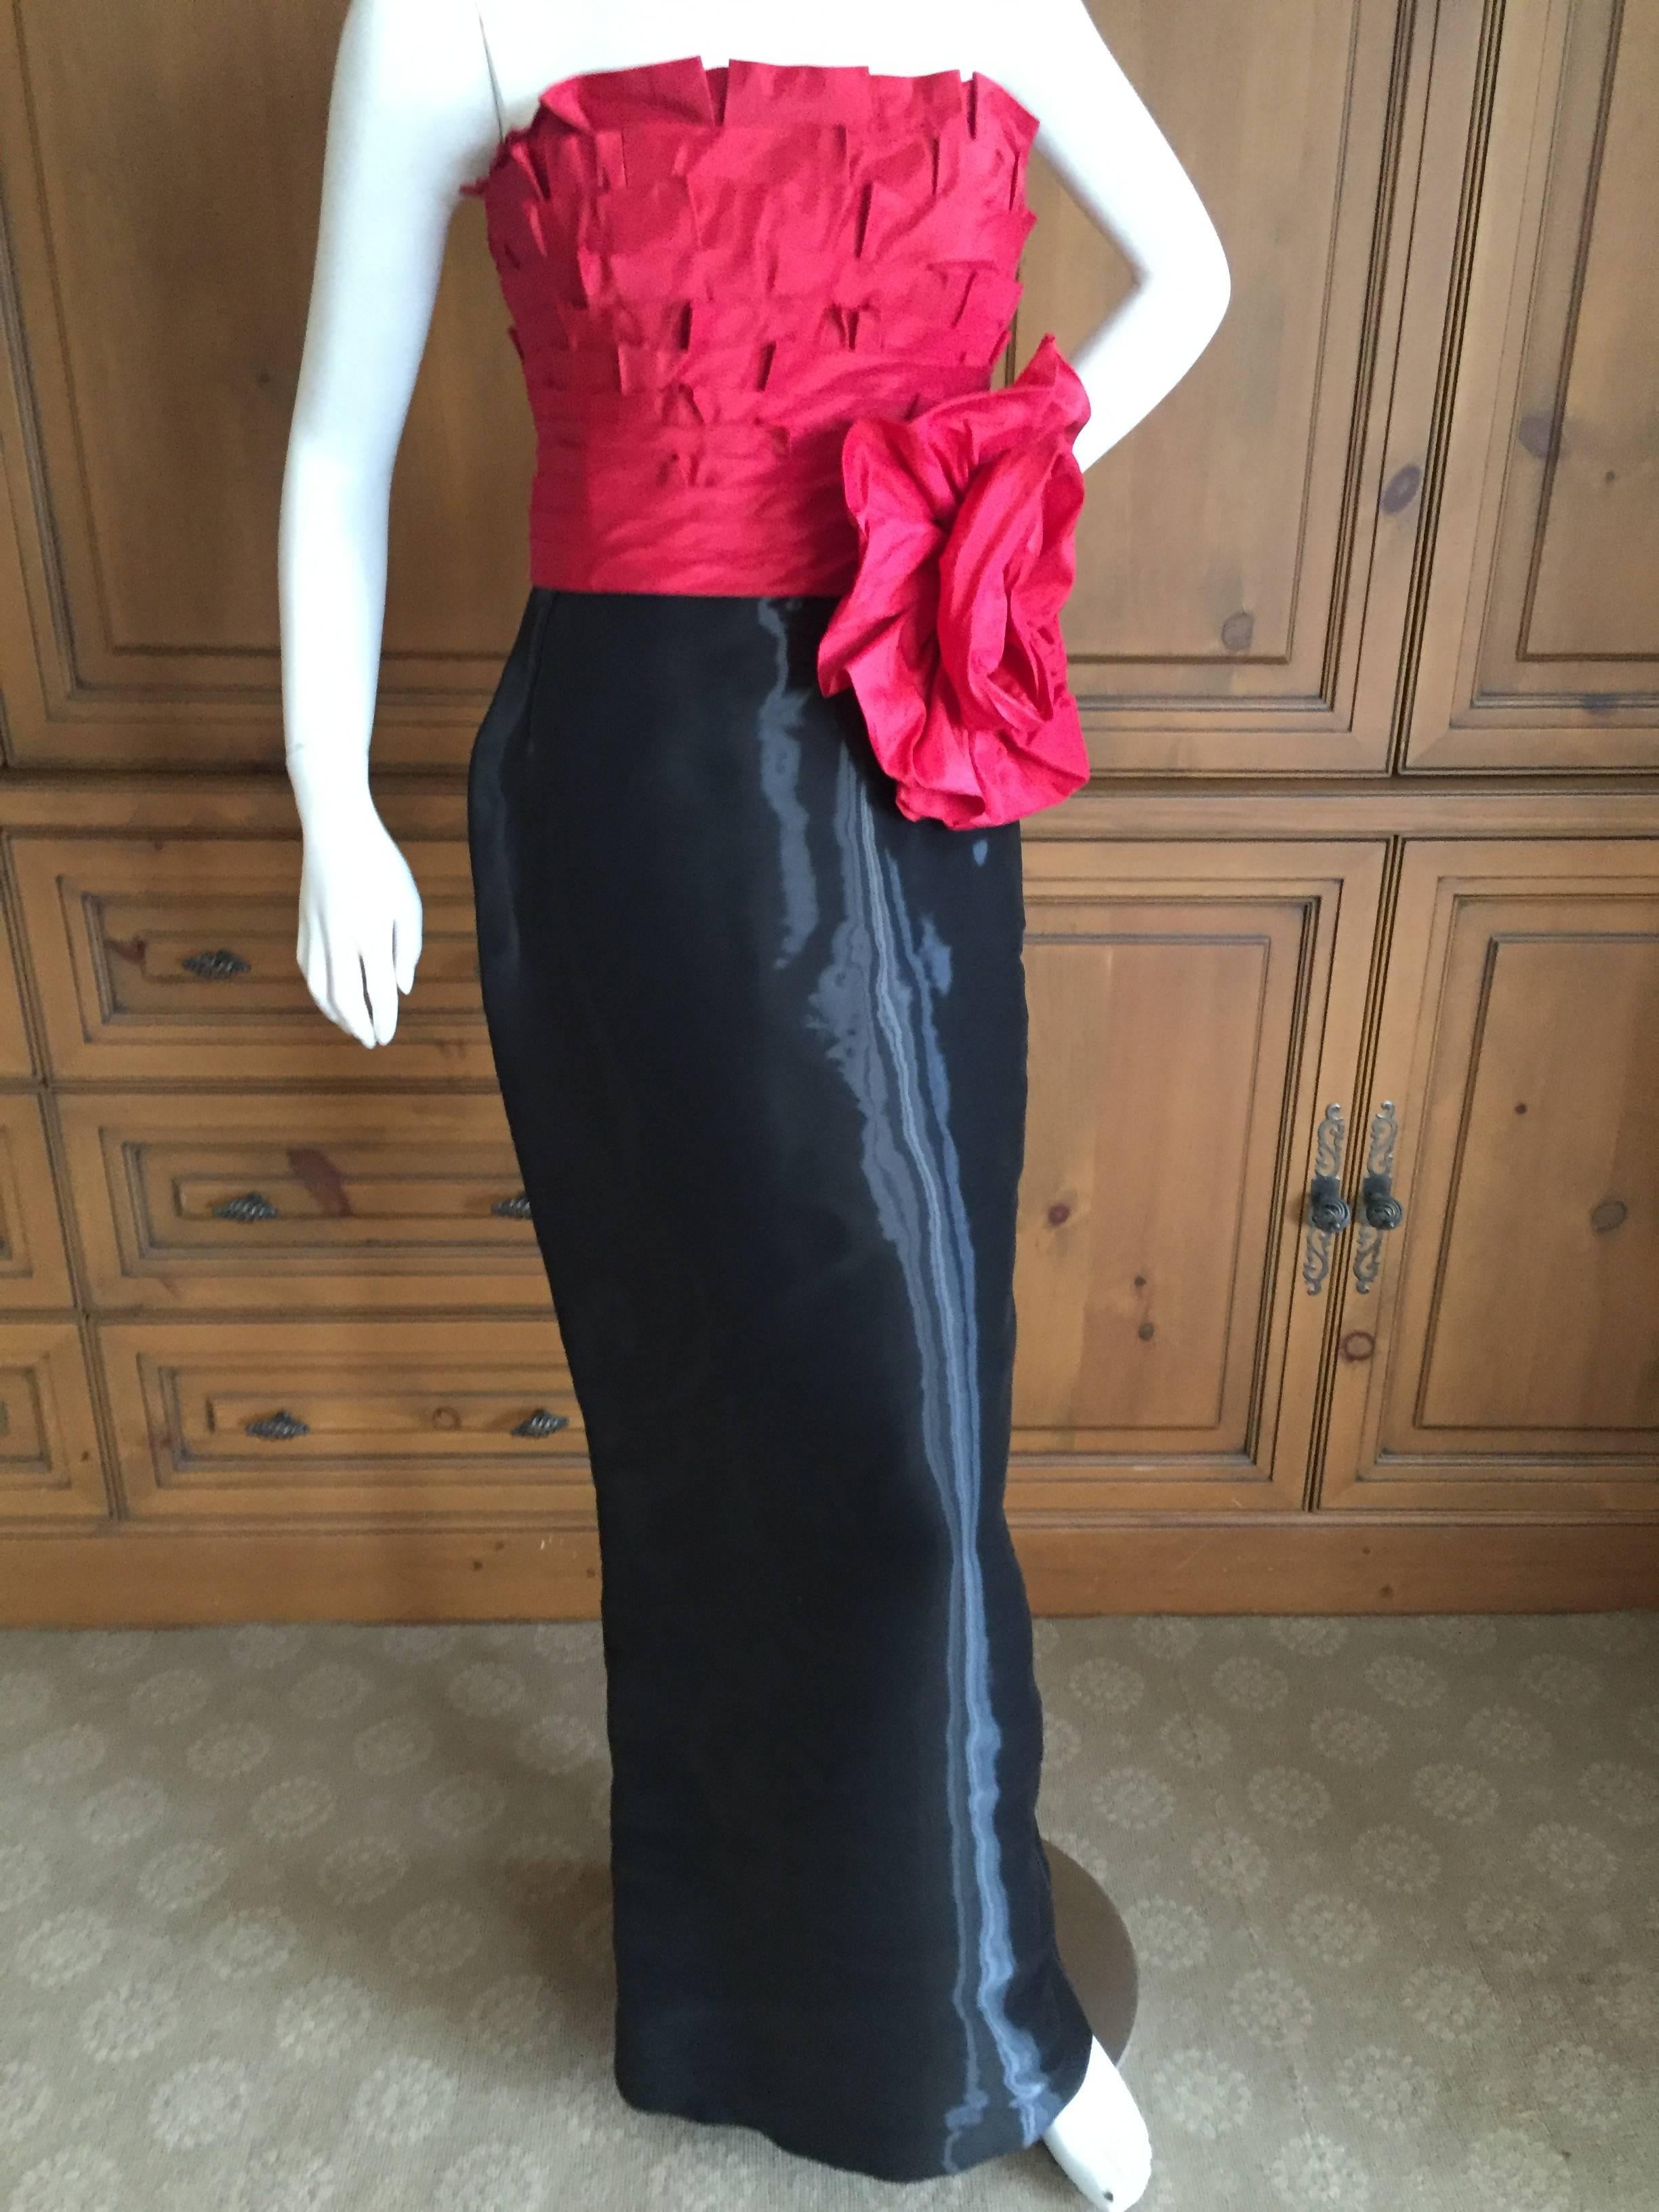 Elegant evening gown from Oscar de la Renta.
The skirt has a wonderful shine, with a dramatic silk flower at the waist.
Featuring a full inner corset.
Bust 36